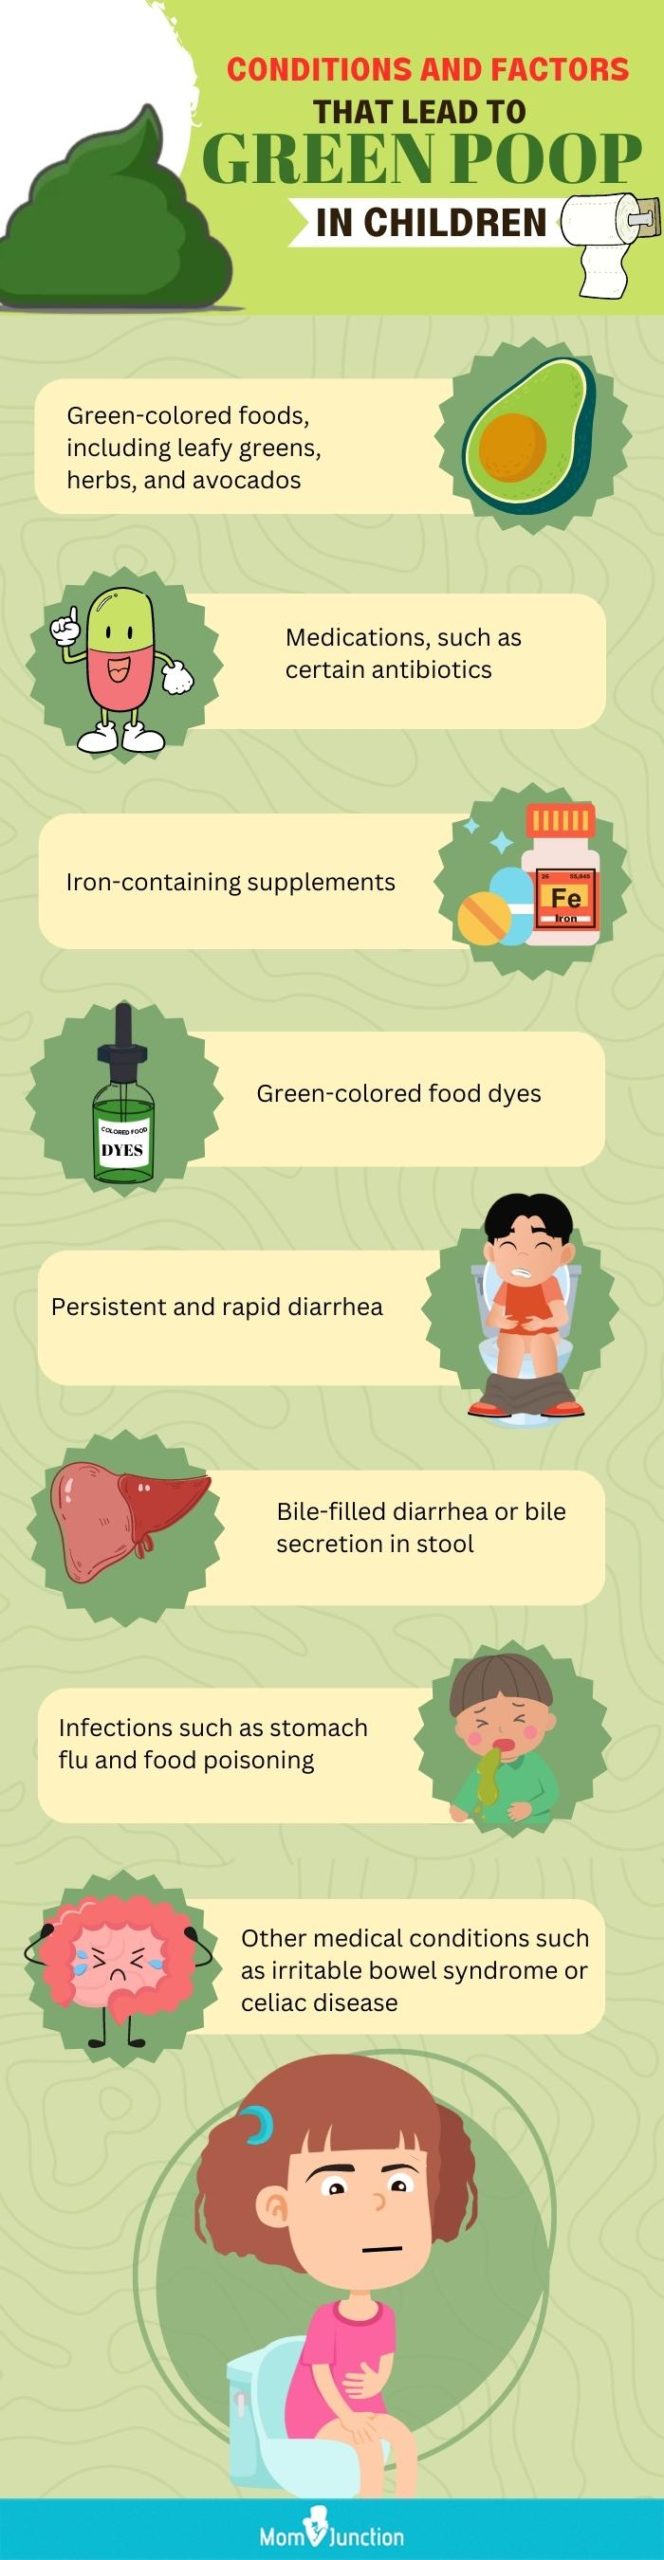 reasons behind your child’s green poop [infographic]